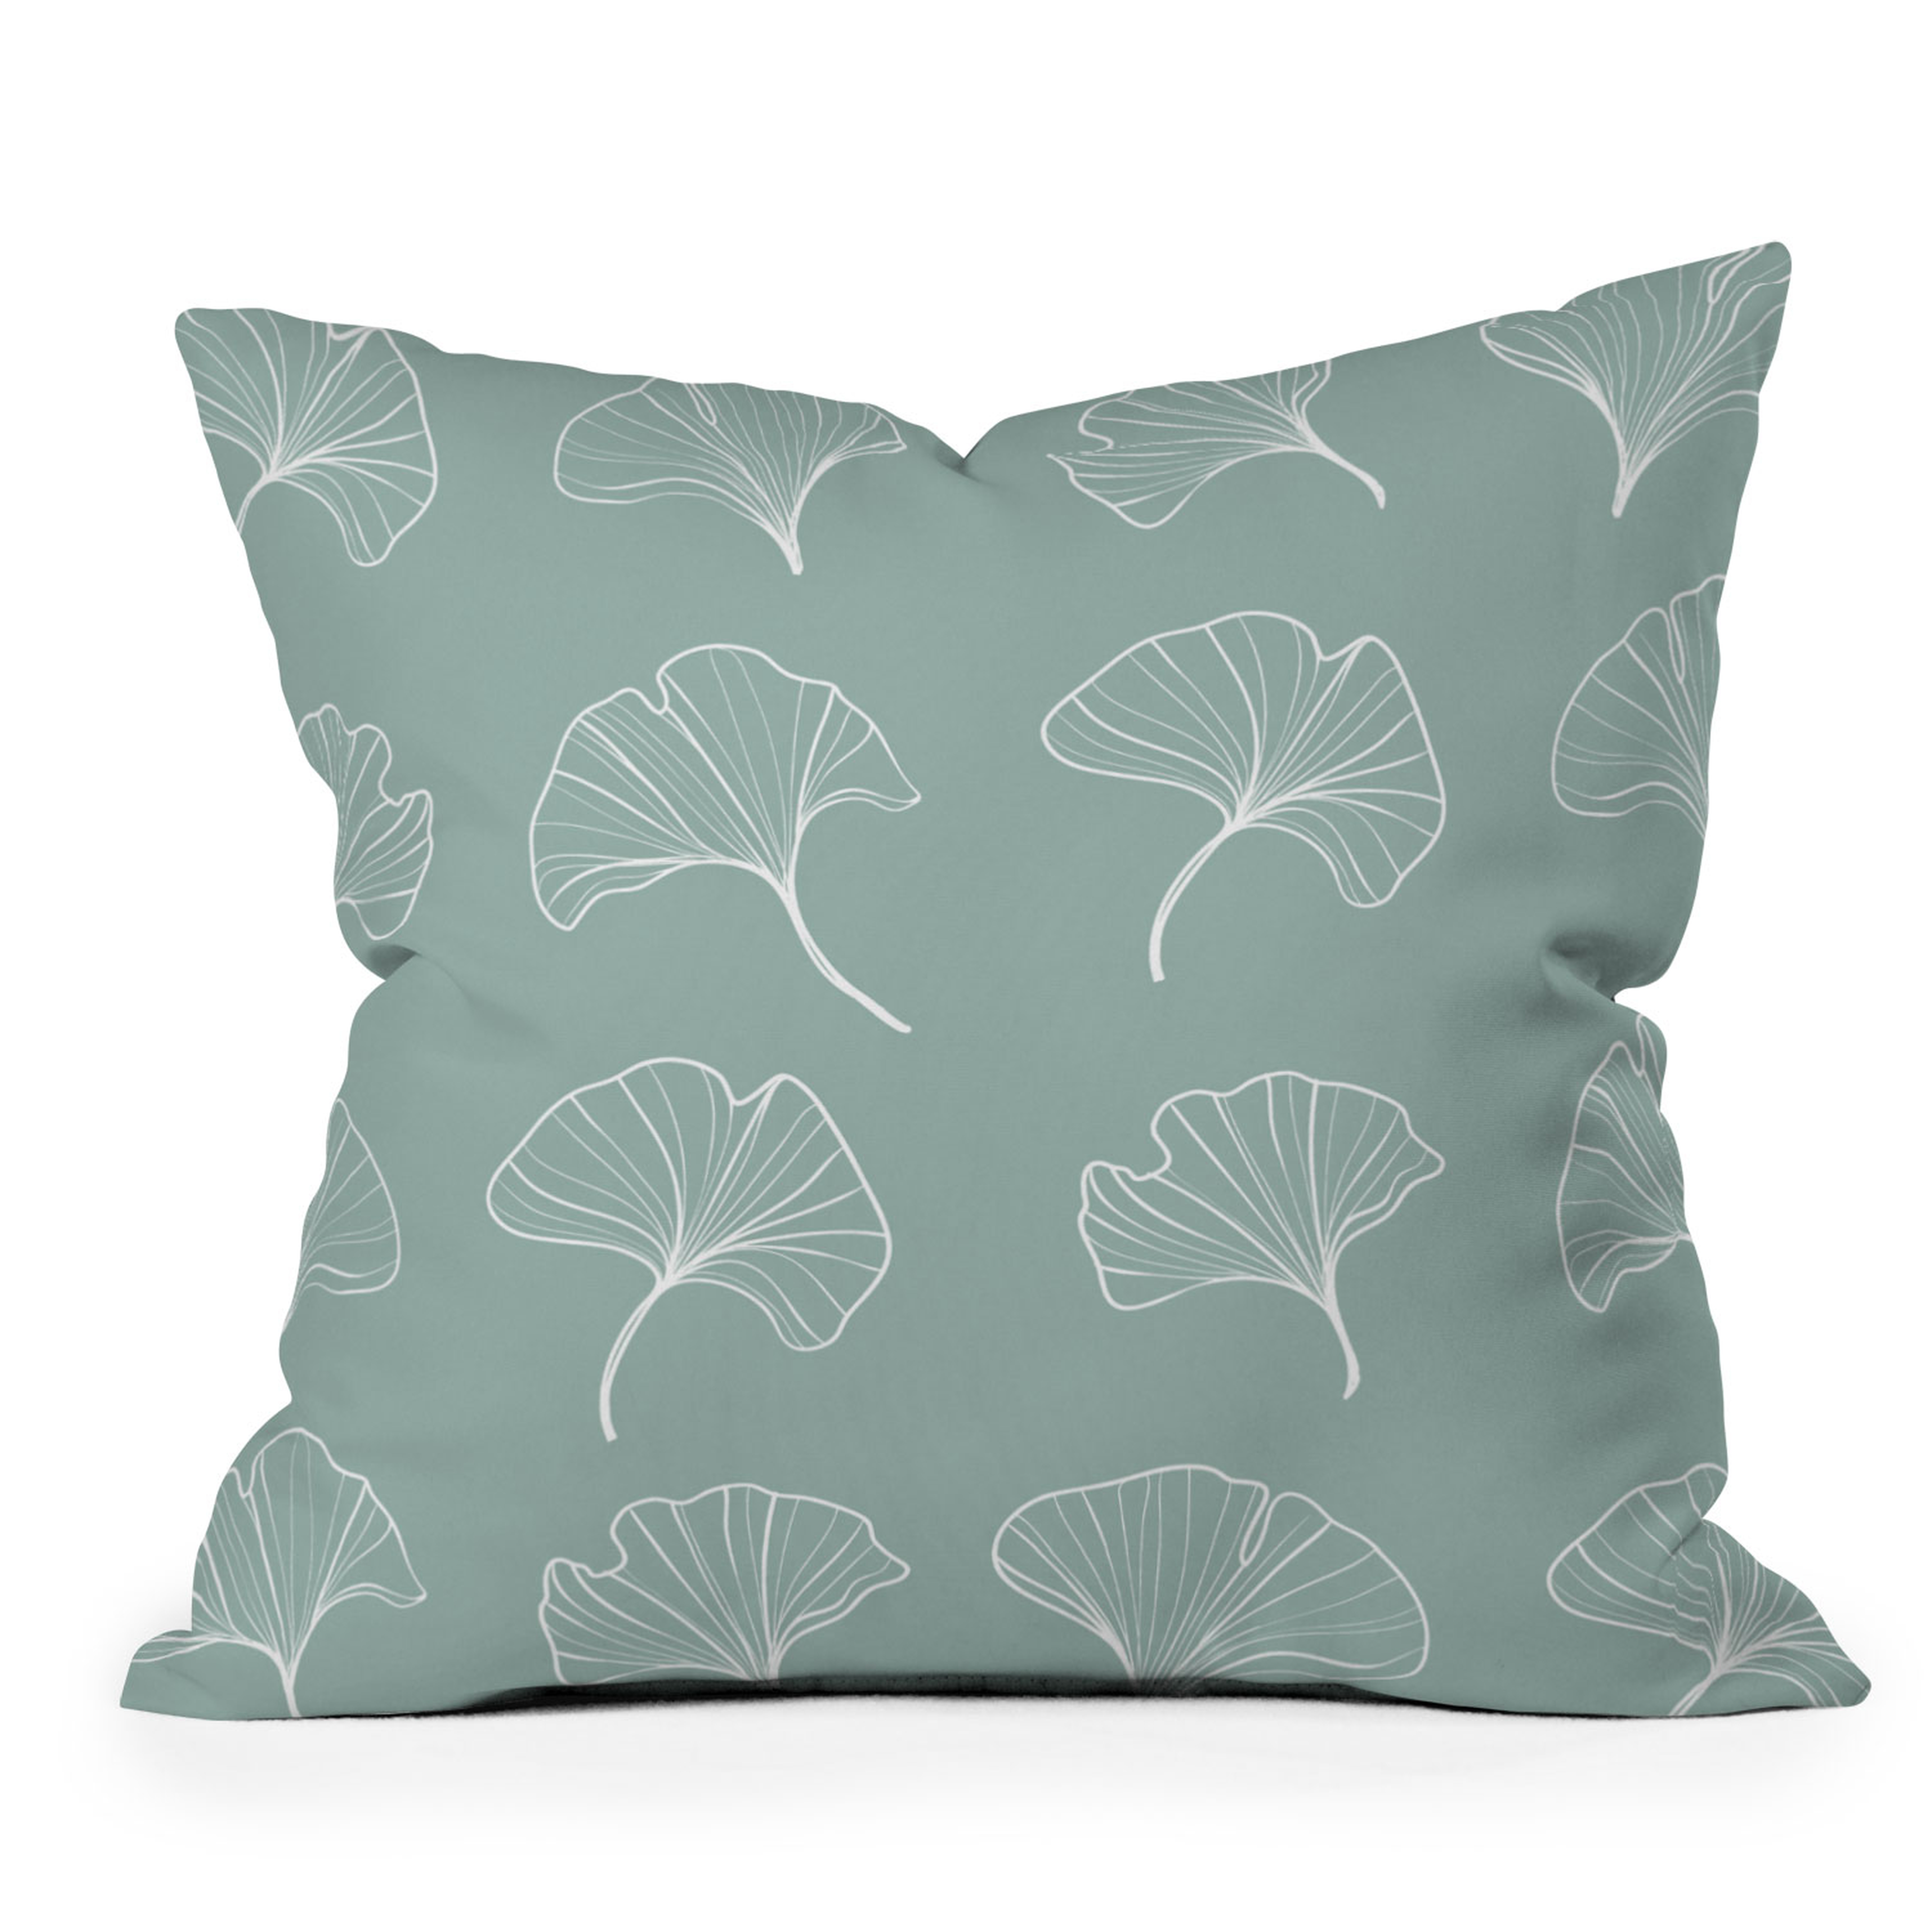 Teal Ginkgo Leaves by Kelly Haines - Outdoor Throw Pillow 20" x 20" - Wander Print Co.